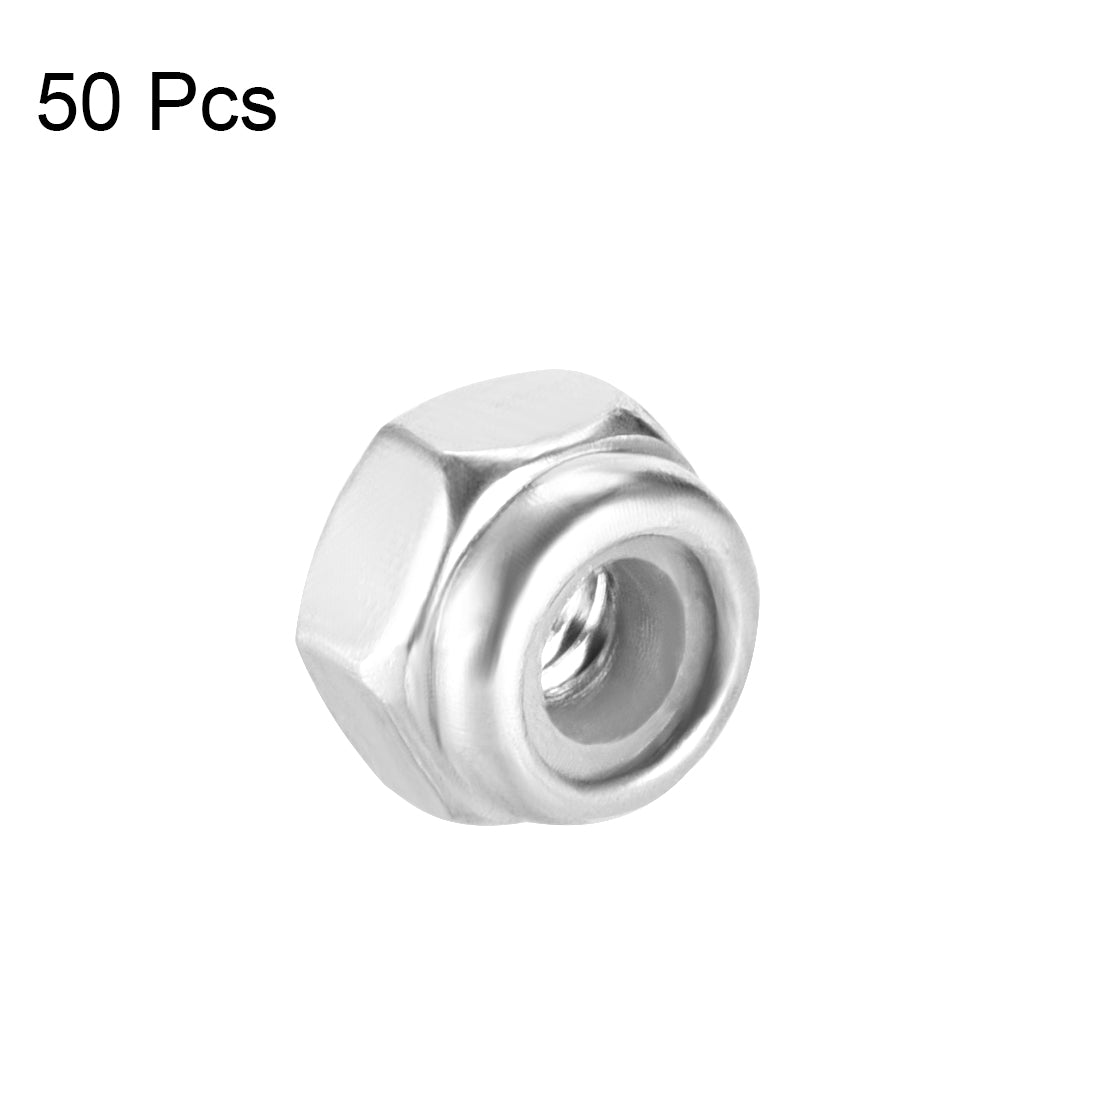 uxcell Uxcell M2.5x0.45mm Hex Lock Nut Stainless Steel Nylon Insert Self-Lock Nut 50Pcs Silver